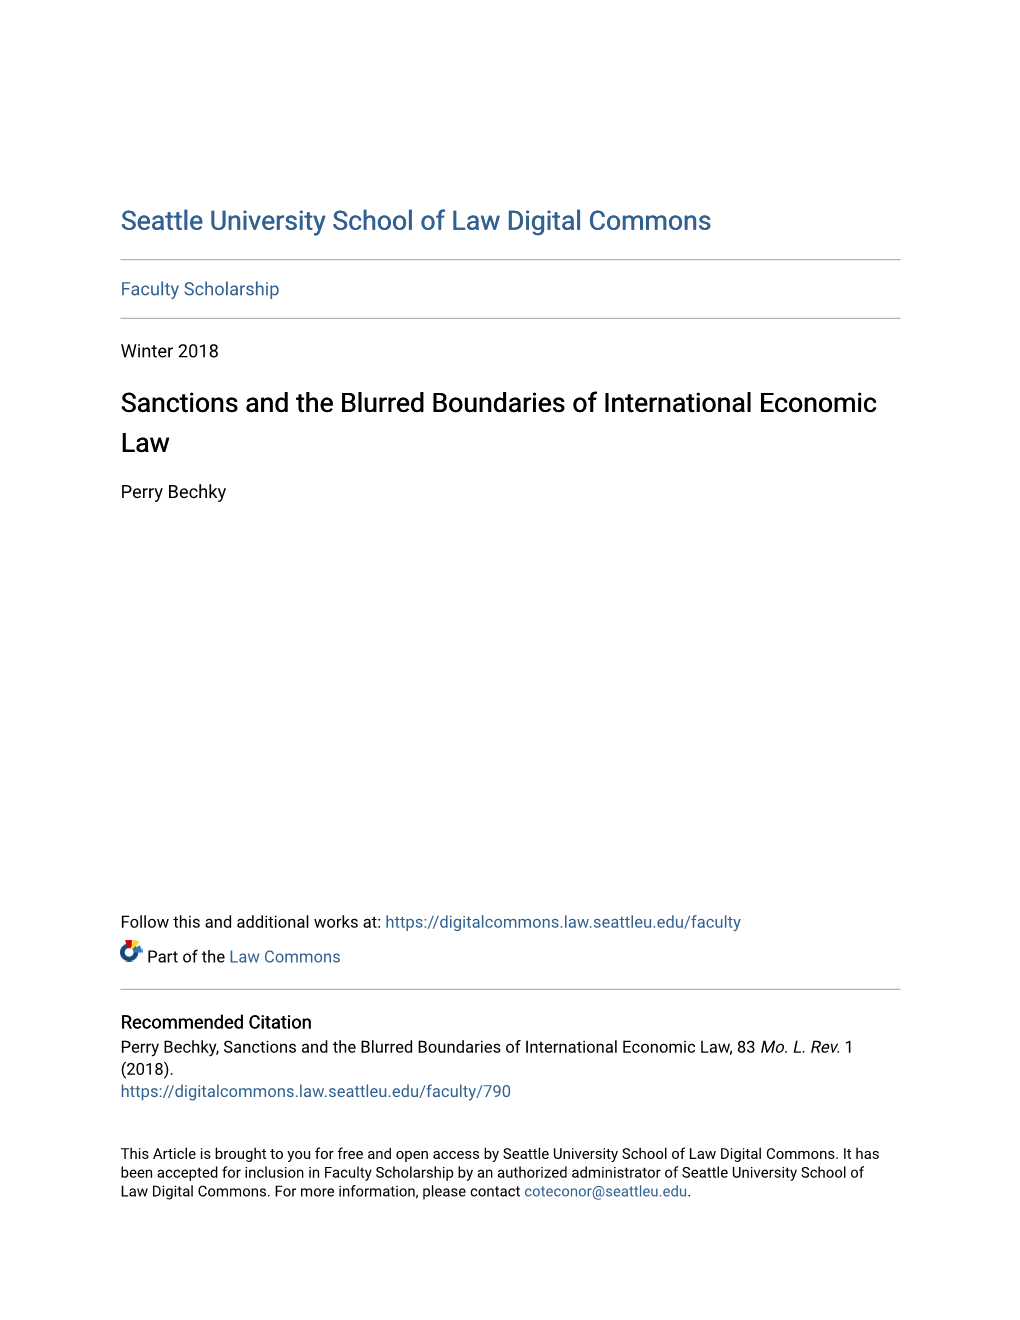 Sanctions and the Blurred Boundaries of International Economic Law